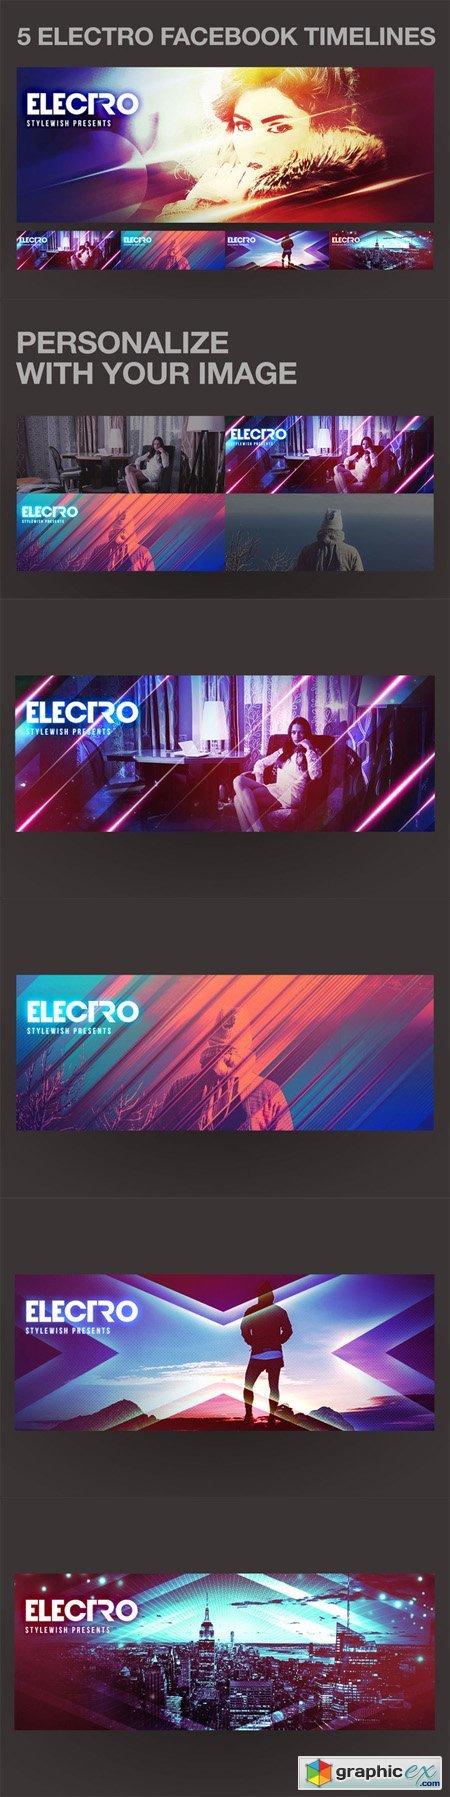 5 Electro Facebook Timeline Covers